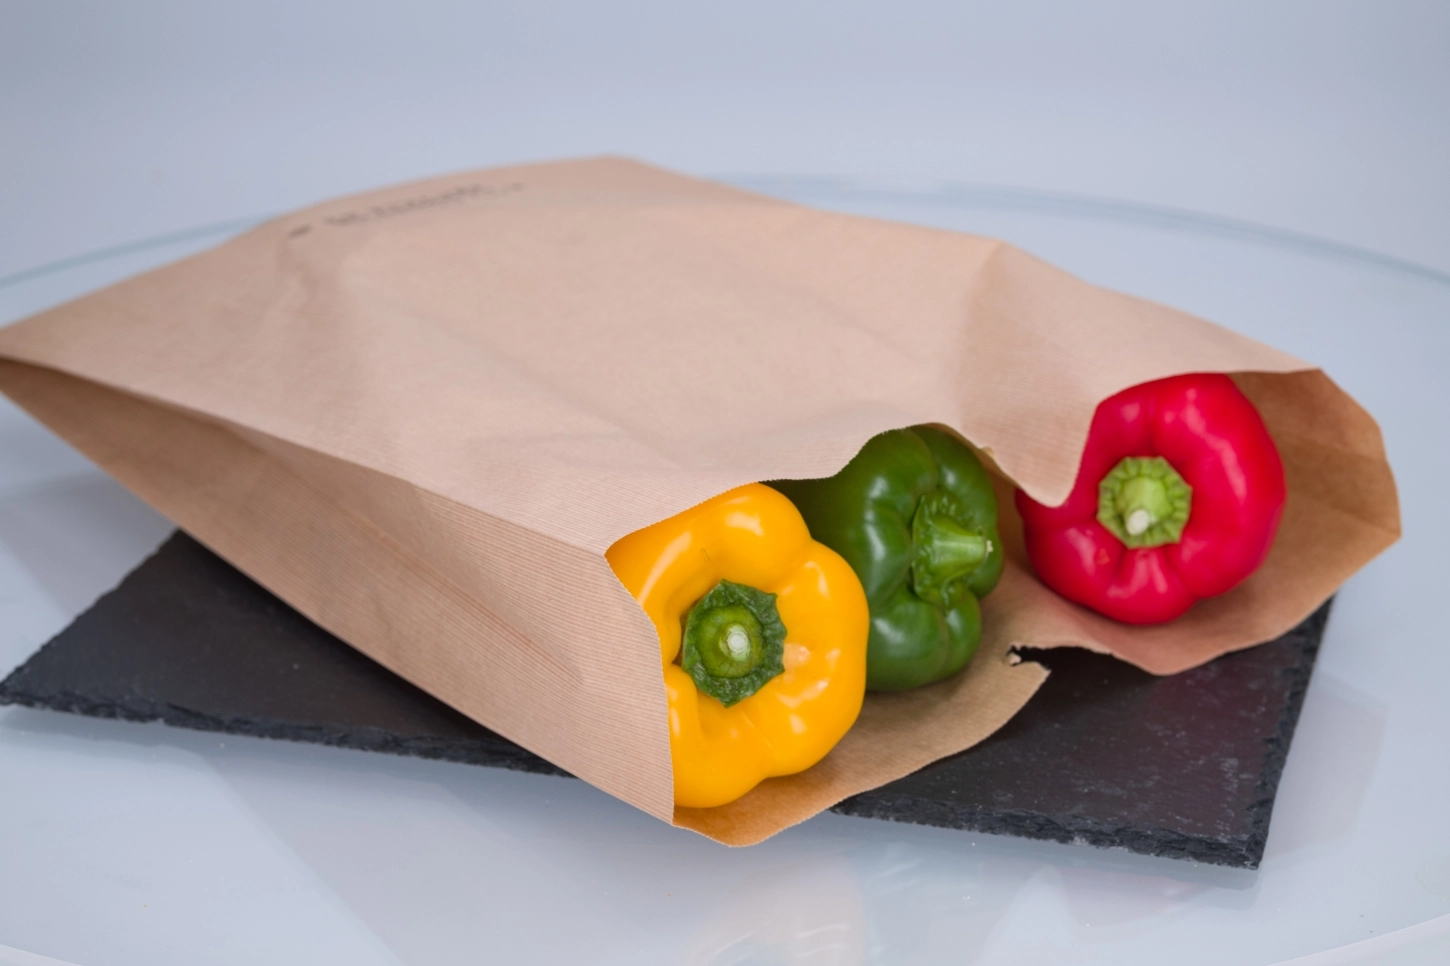 With solid packaging for fruit and vegetables you ensure that these products are firmly packed.